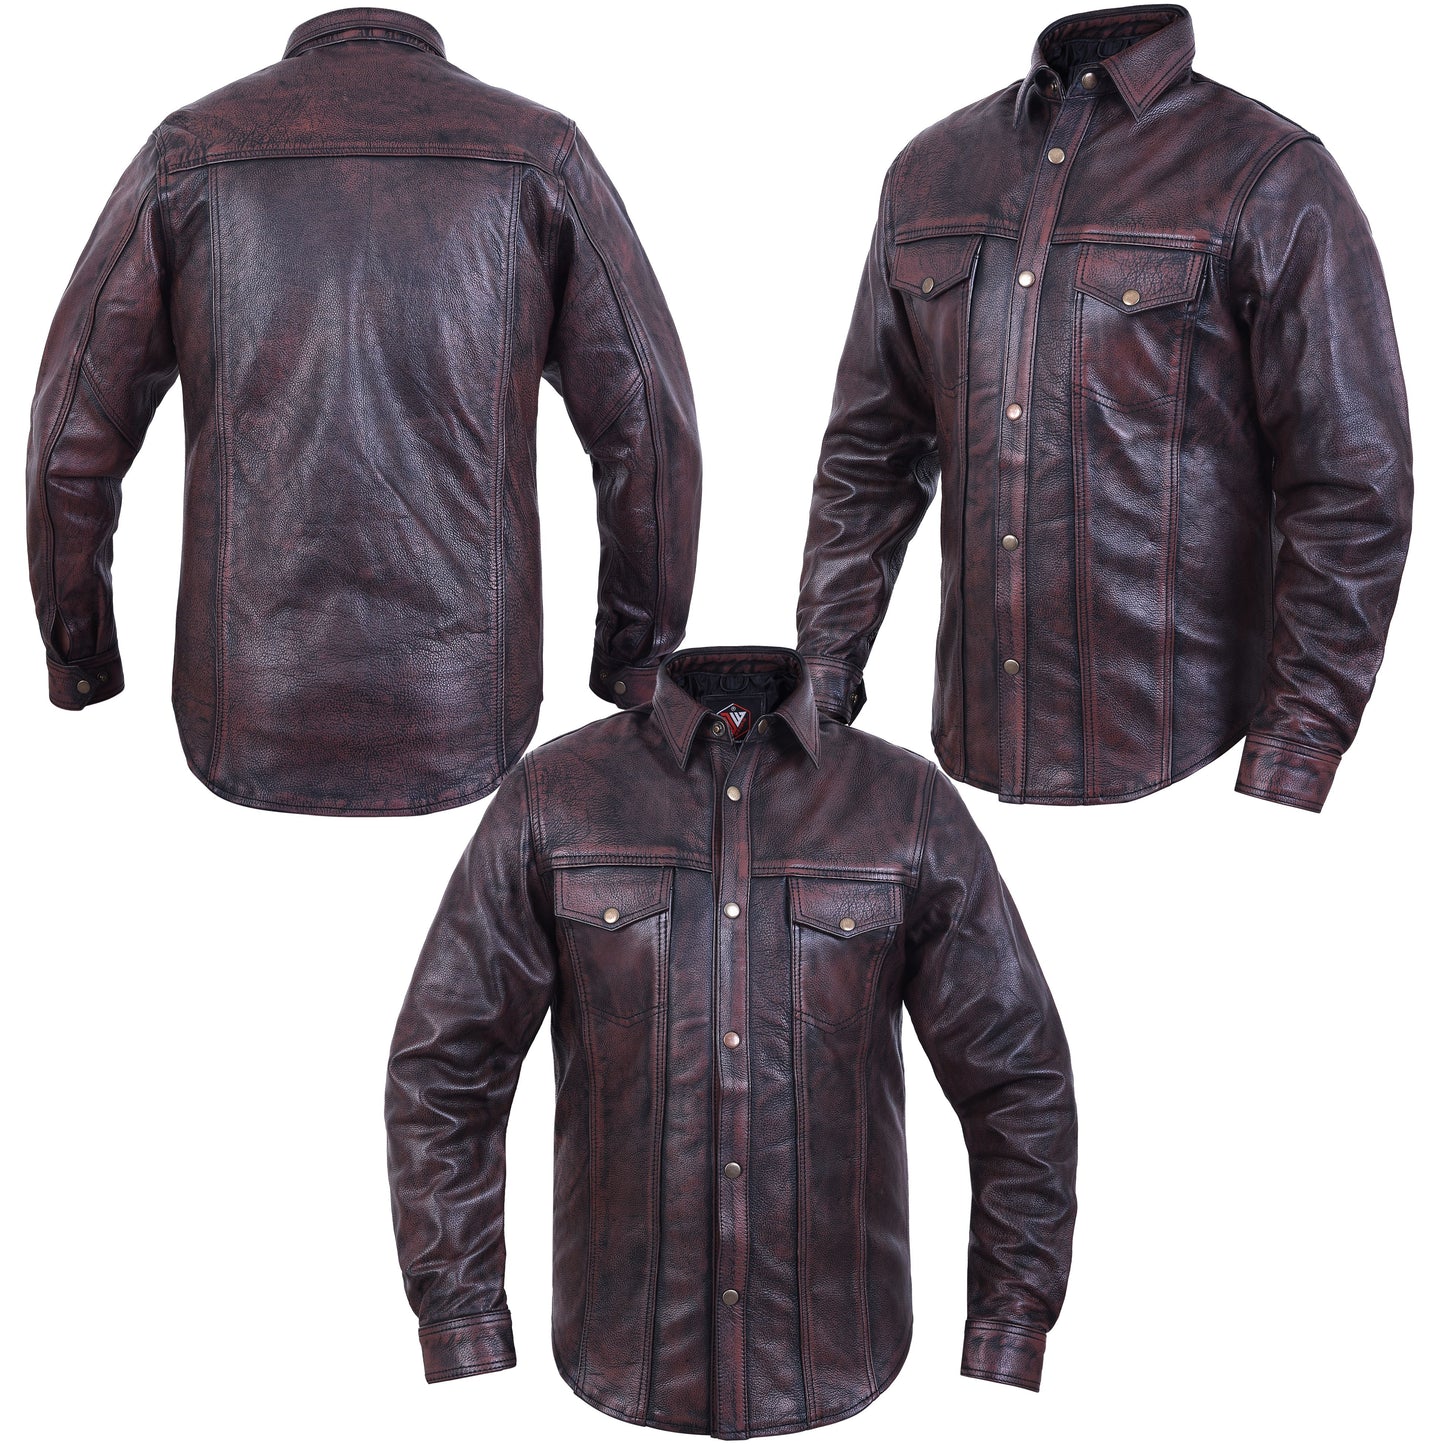 ZAWIAR Premium Leather Button-Down Shirt for Men - Full Sleeve Style for a Polished Look